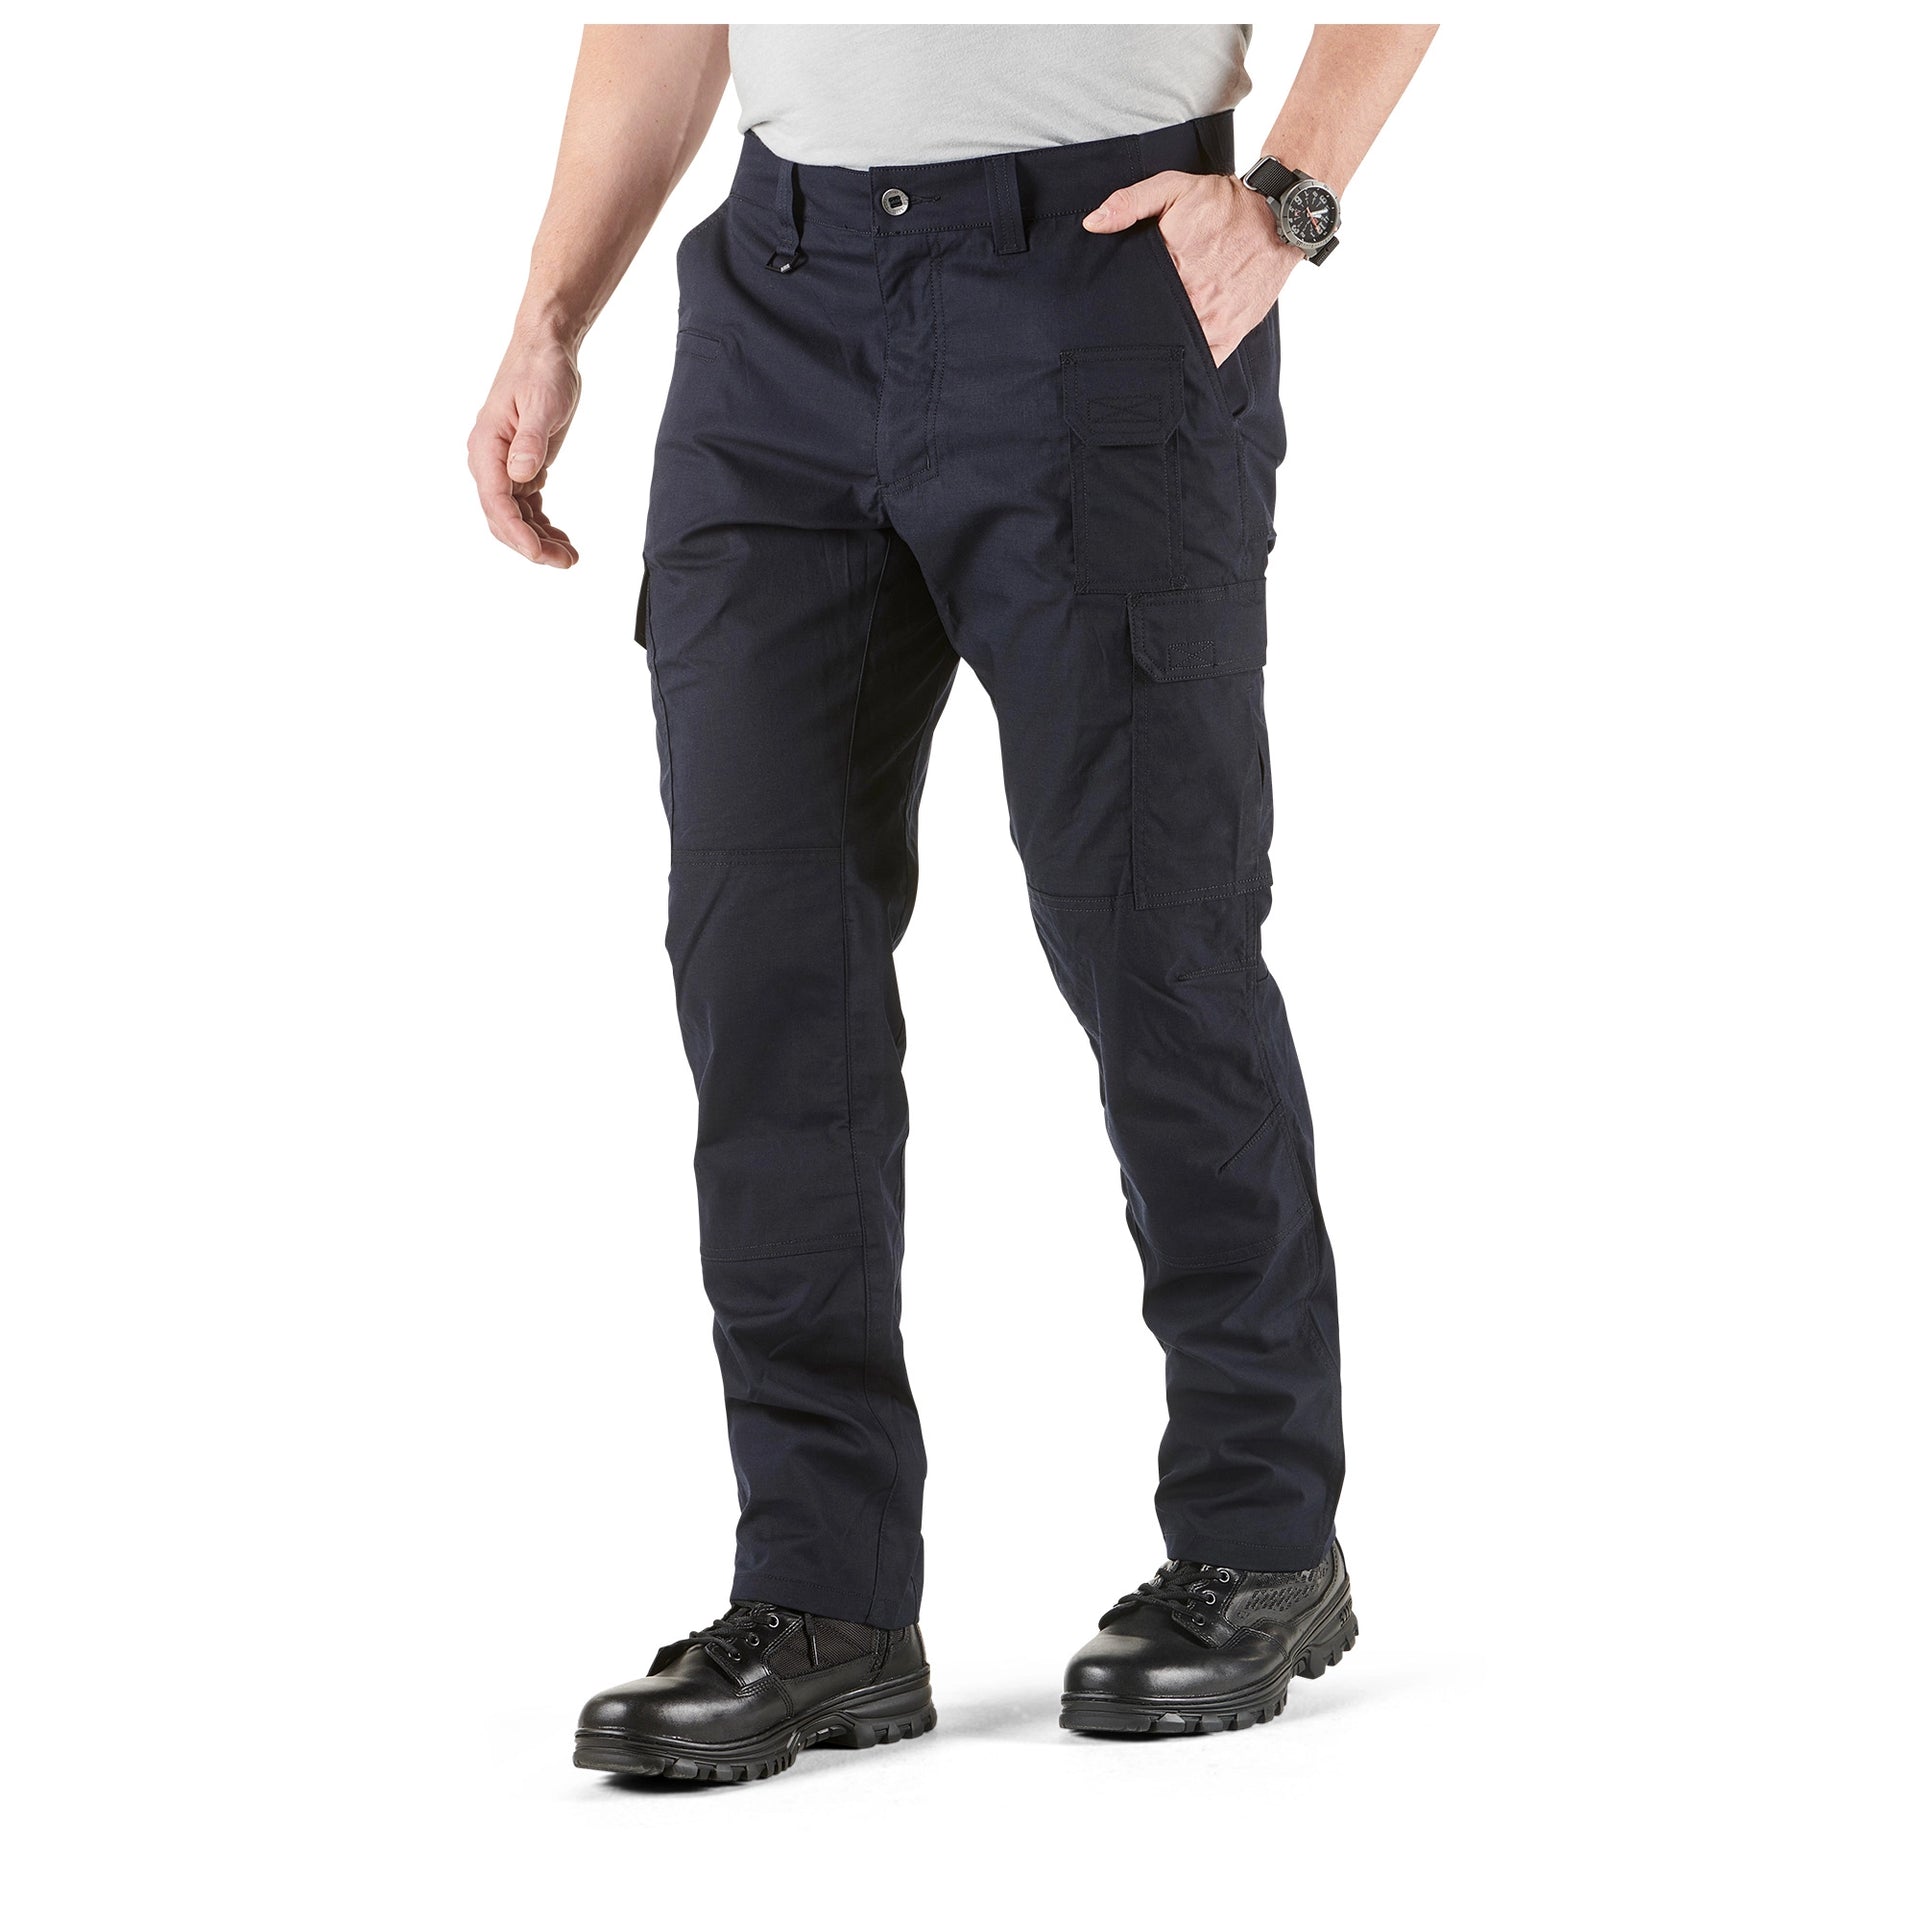 5.11 Tactical ABR™ Pro Pant (74512) | The Fire Center | Fuego Fire Center | Firefighter Gear | The Fire Store | The next evolution of the 5.11 Tactical pant is here. The ABR™ Pro Pant packs a mean punch, with 9 total pockets, reinforced seat and knees and our trademark utility strap. And it’s all rolled into a relaxed, straight-fit profile.